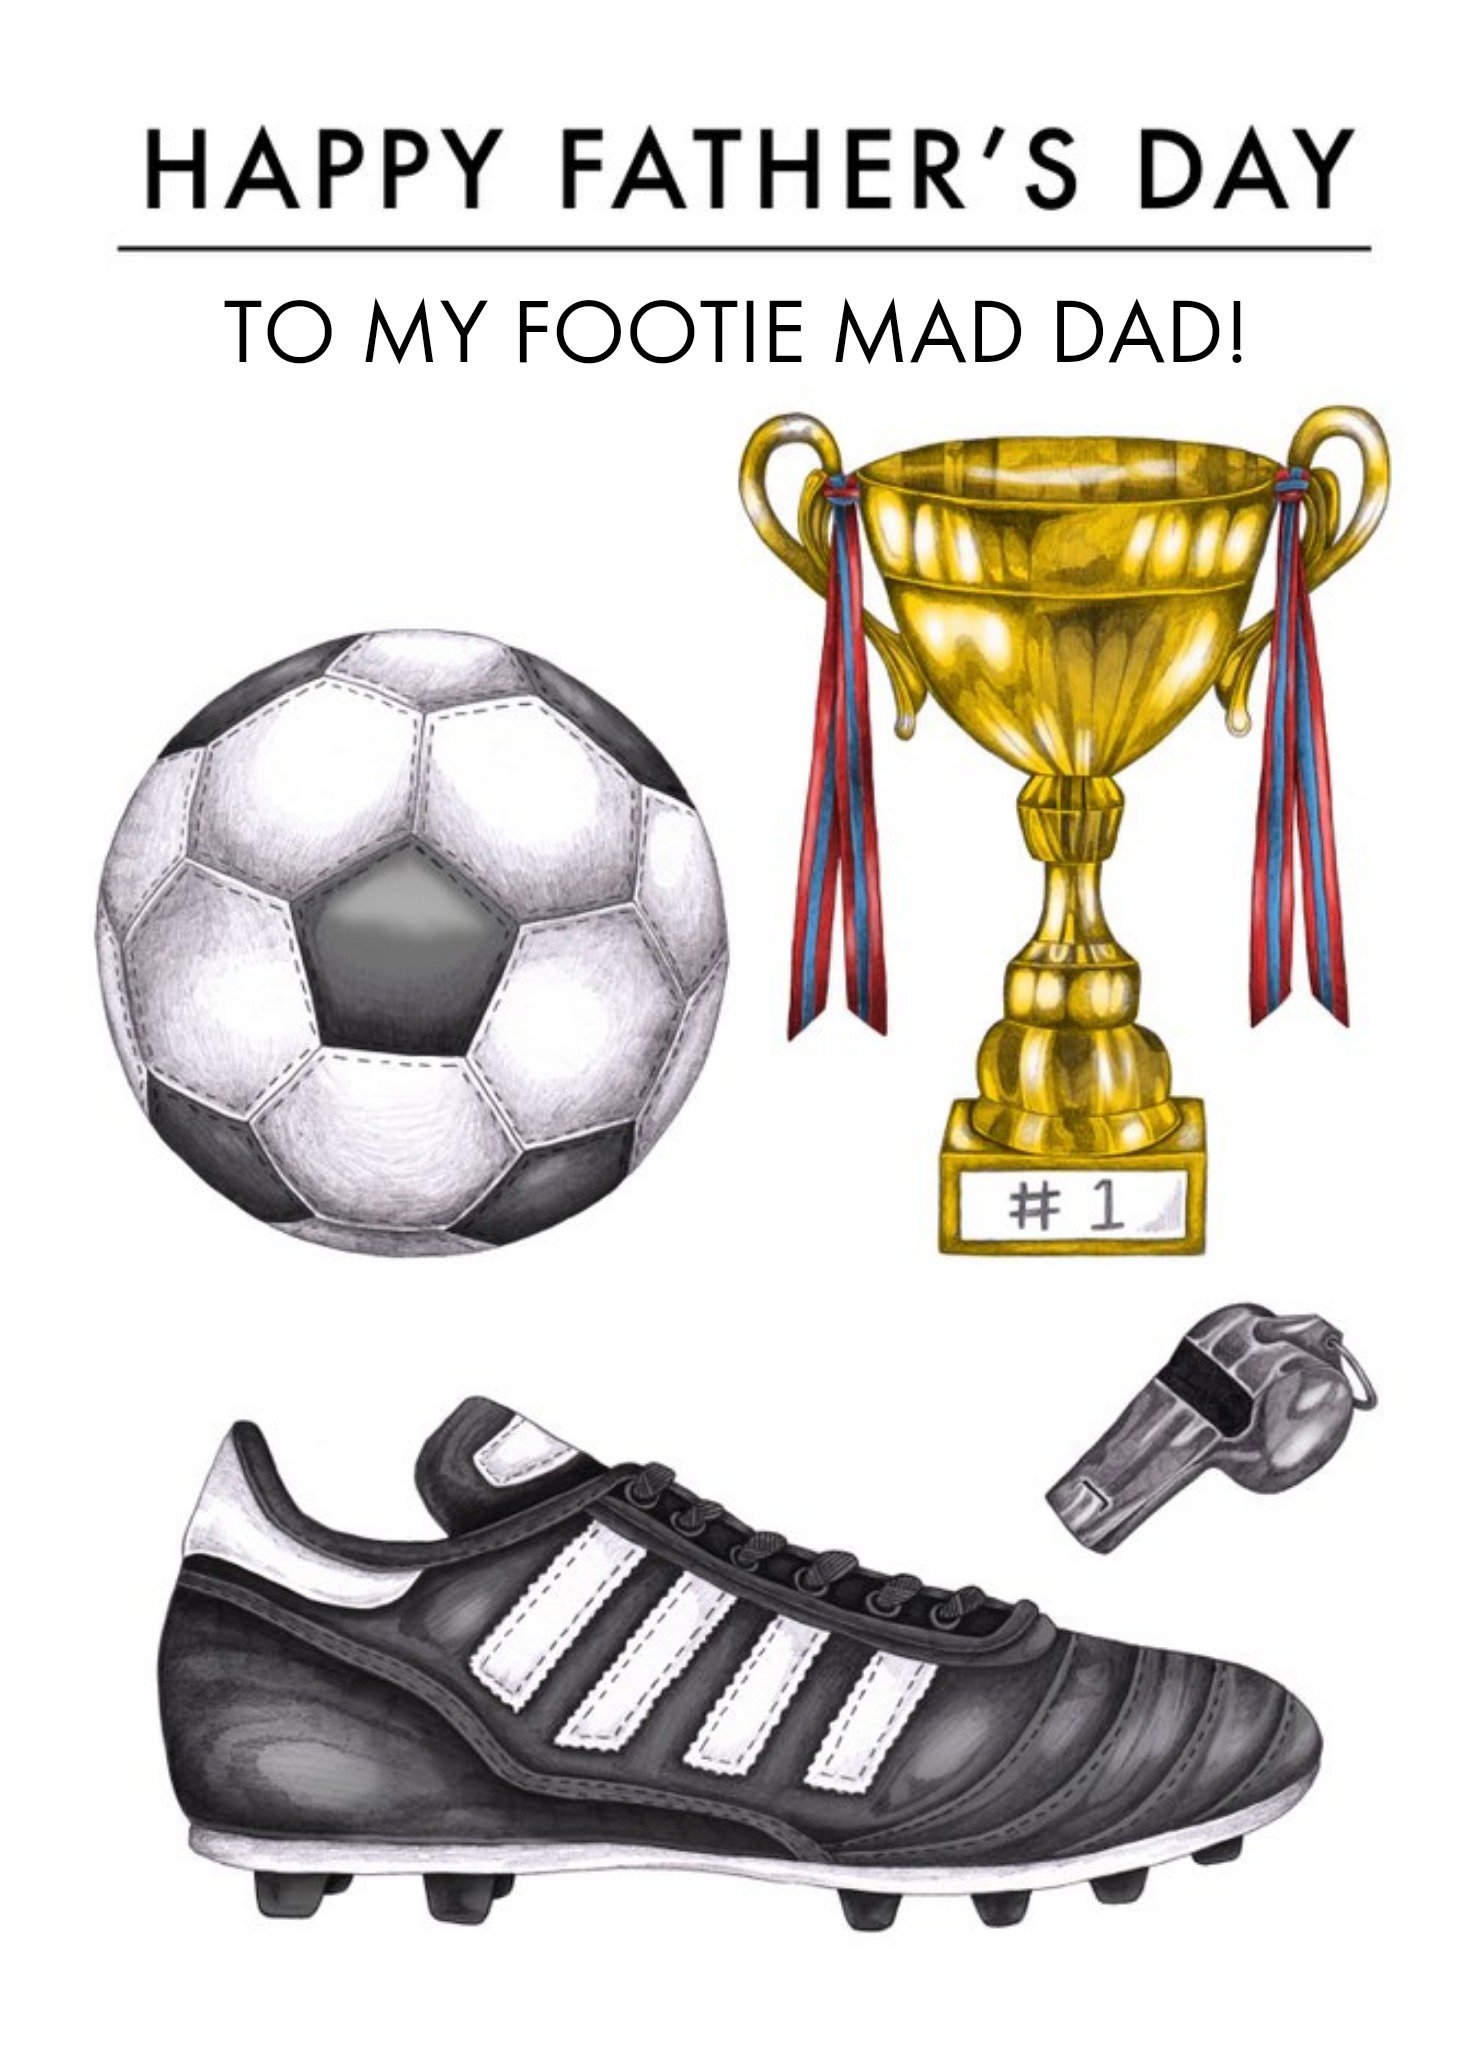 Moonpig To My Footie Mad Dad Happy Father's Day Card, Large